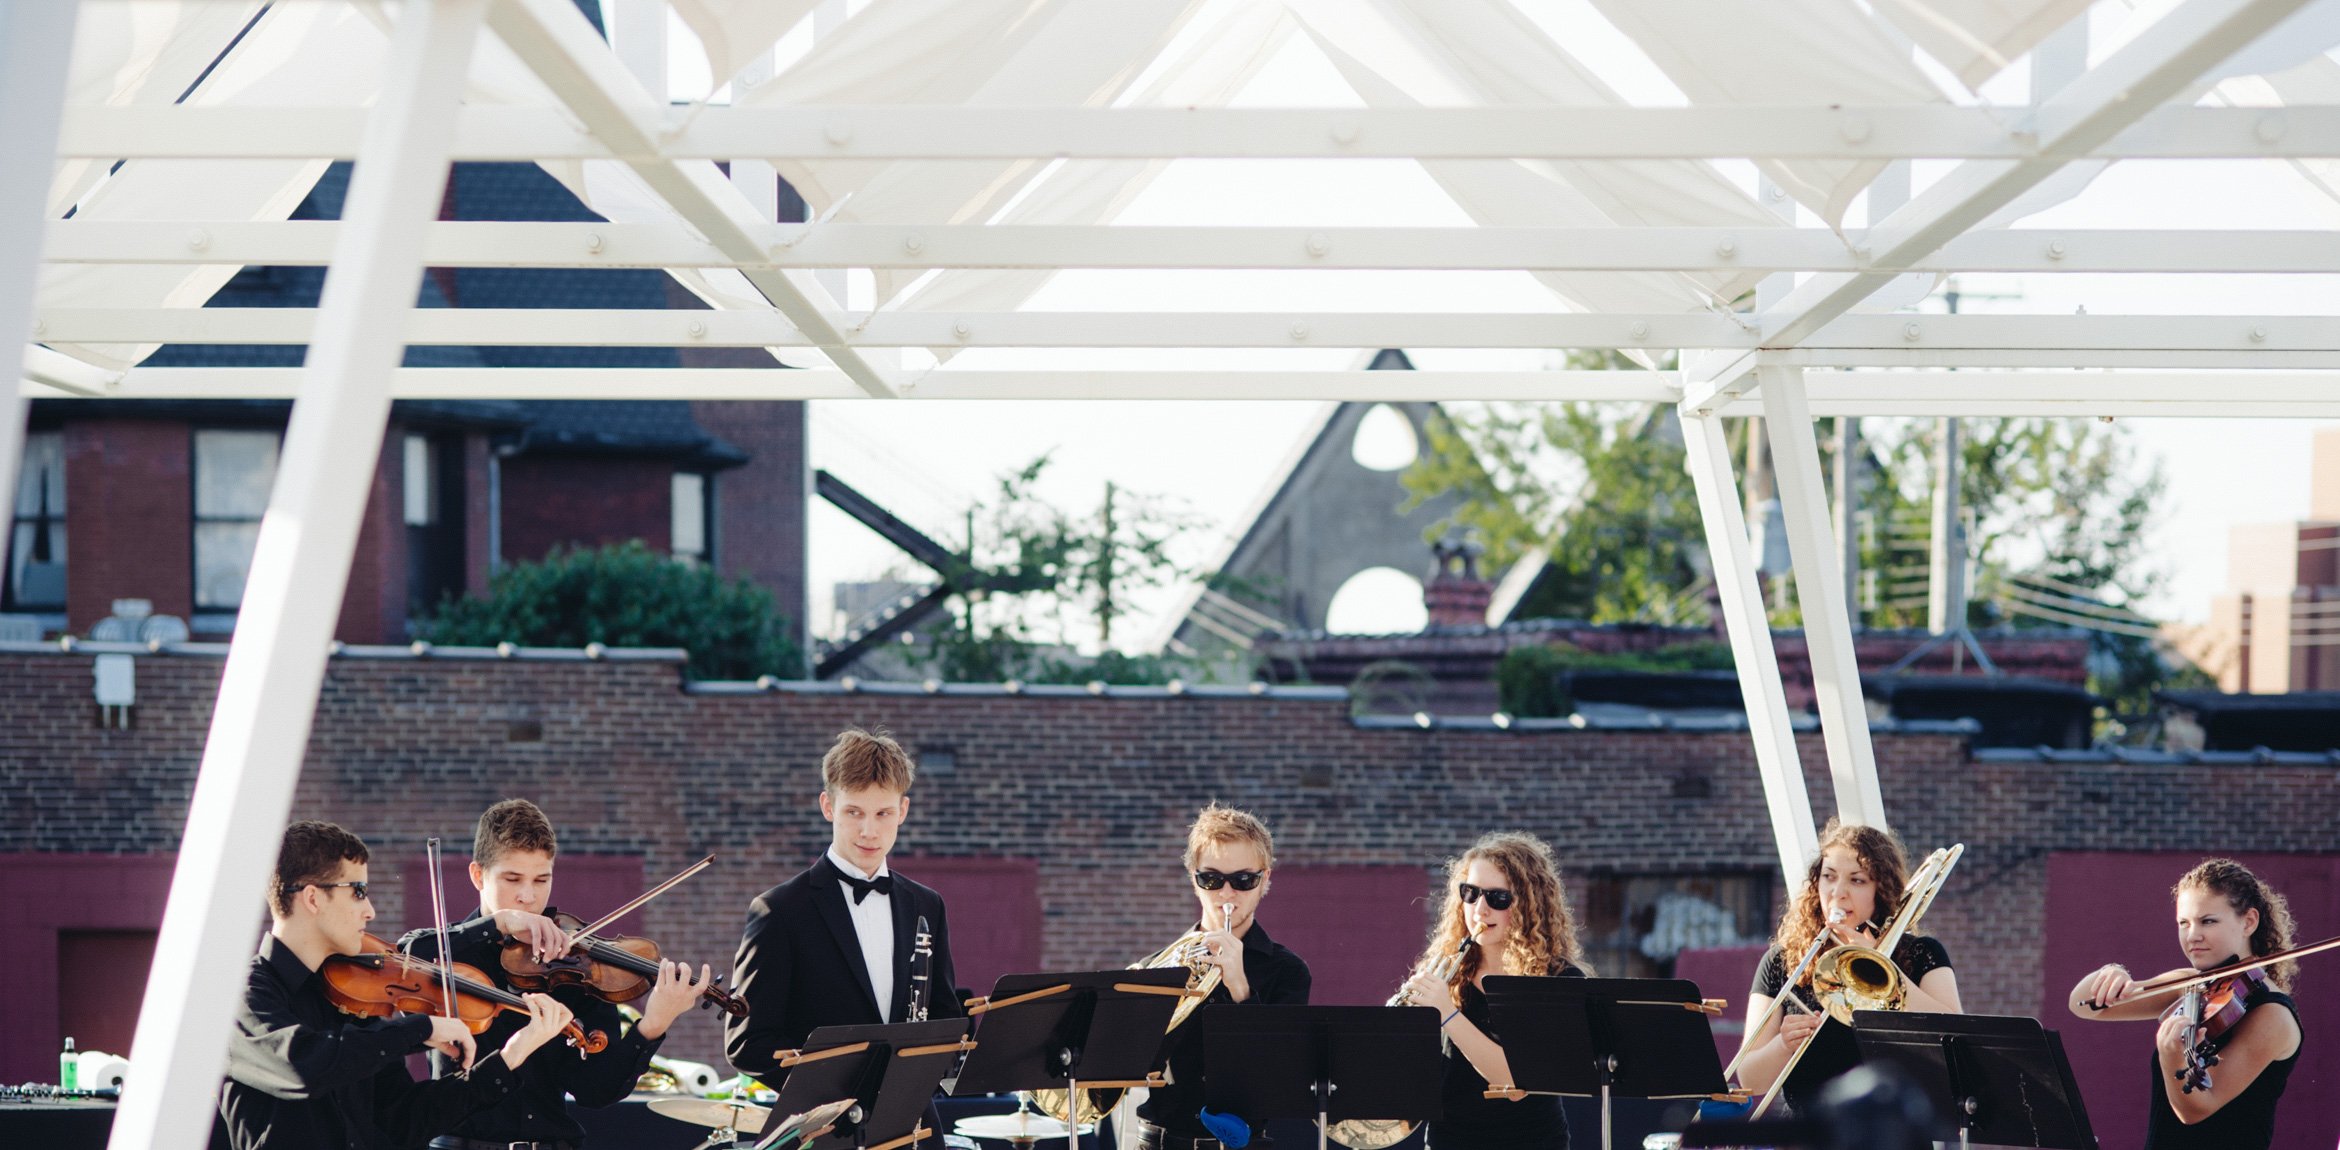 Student musicians perform outdoors under a white geometric canopy installation.